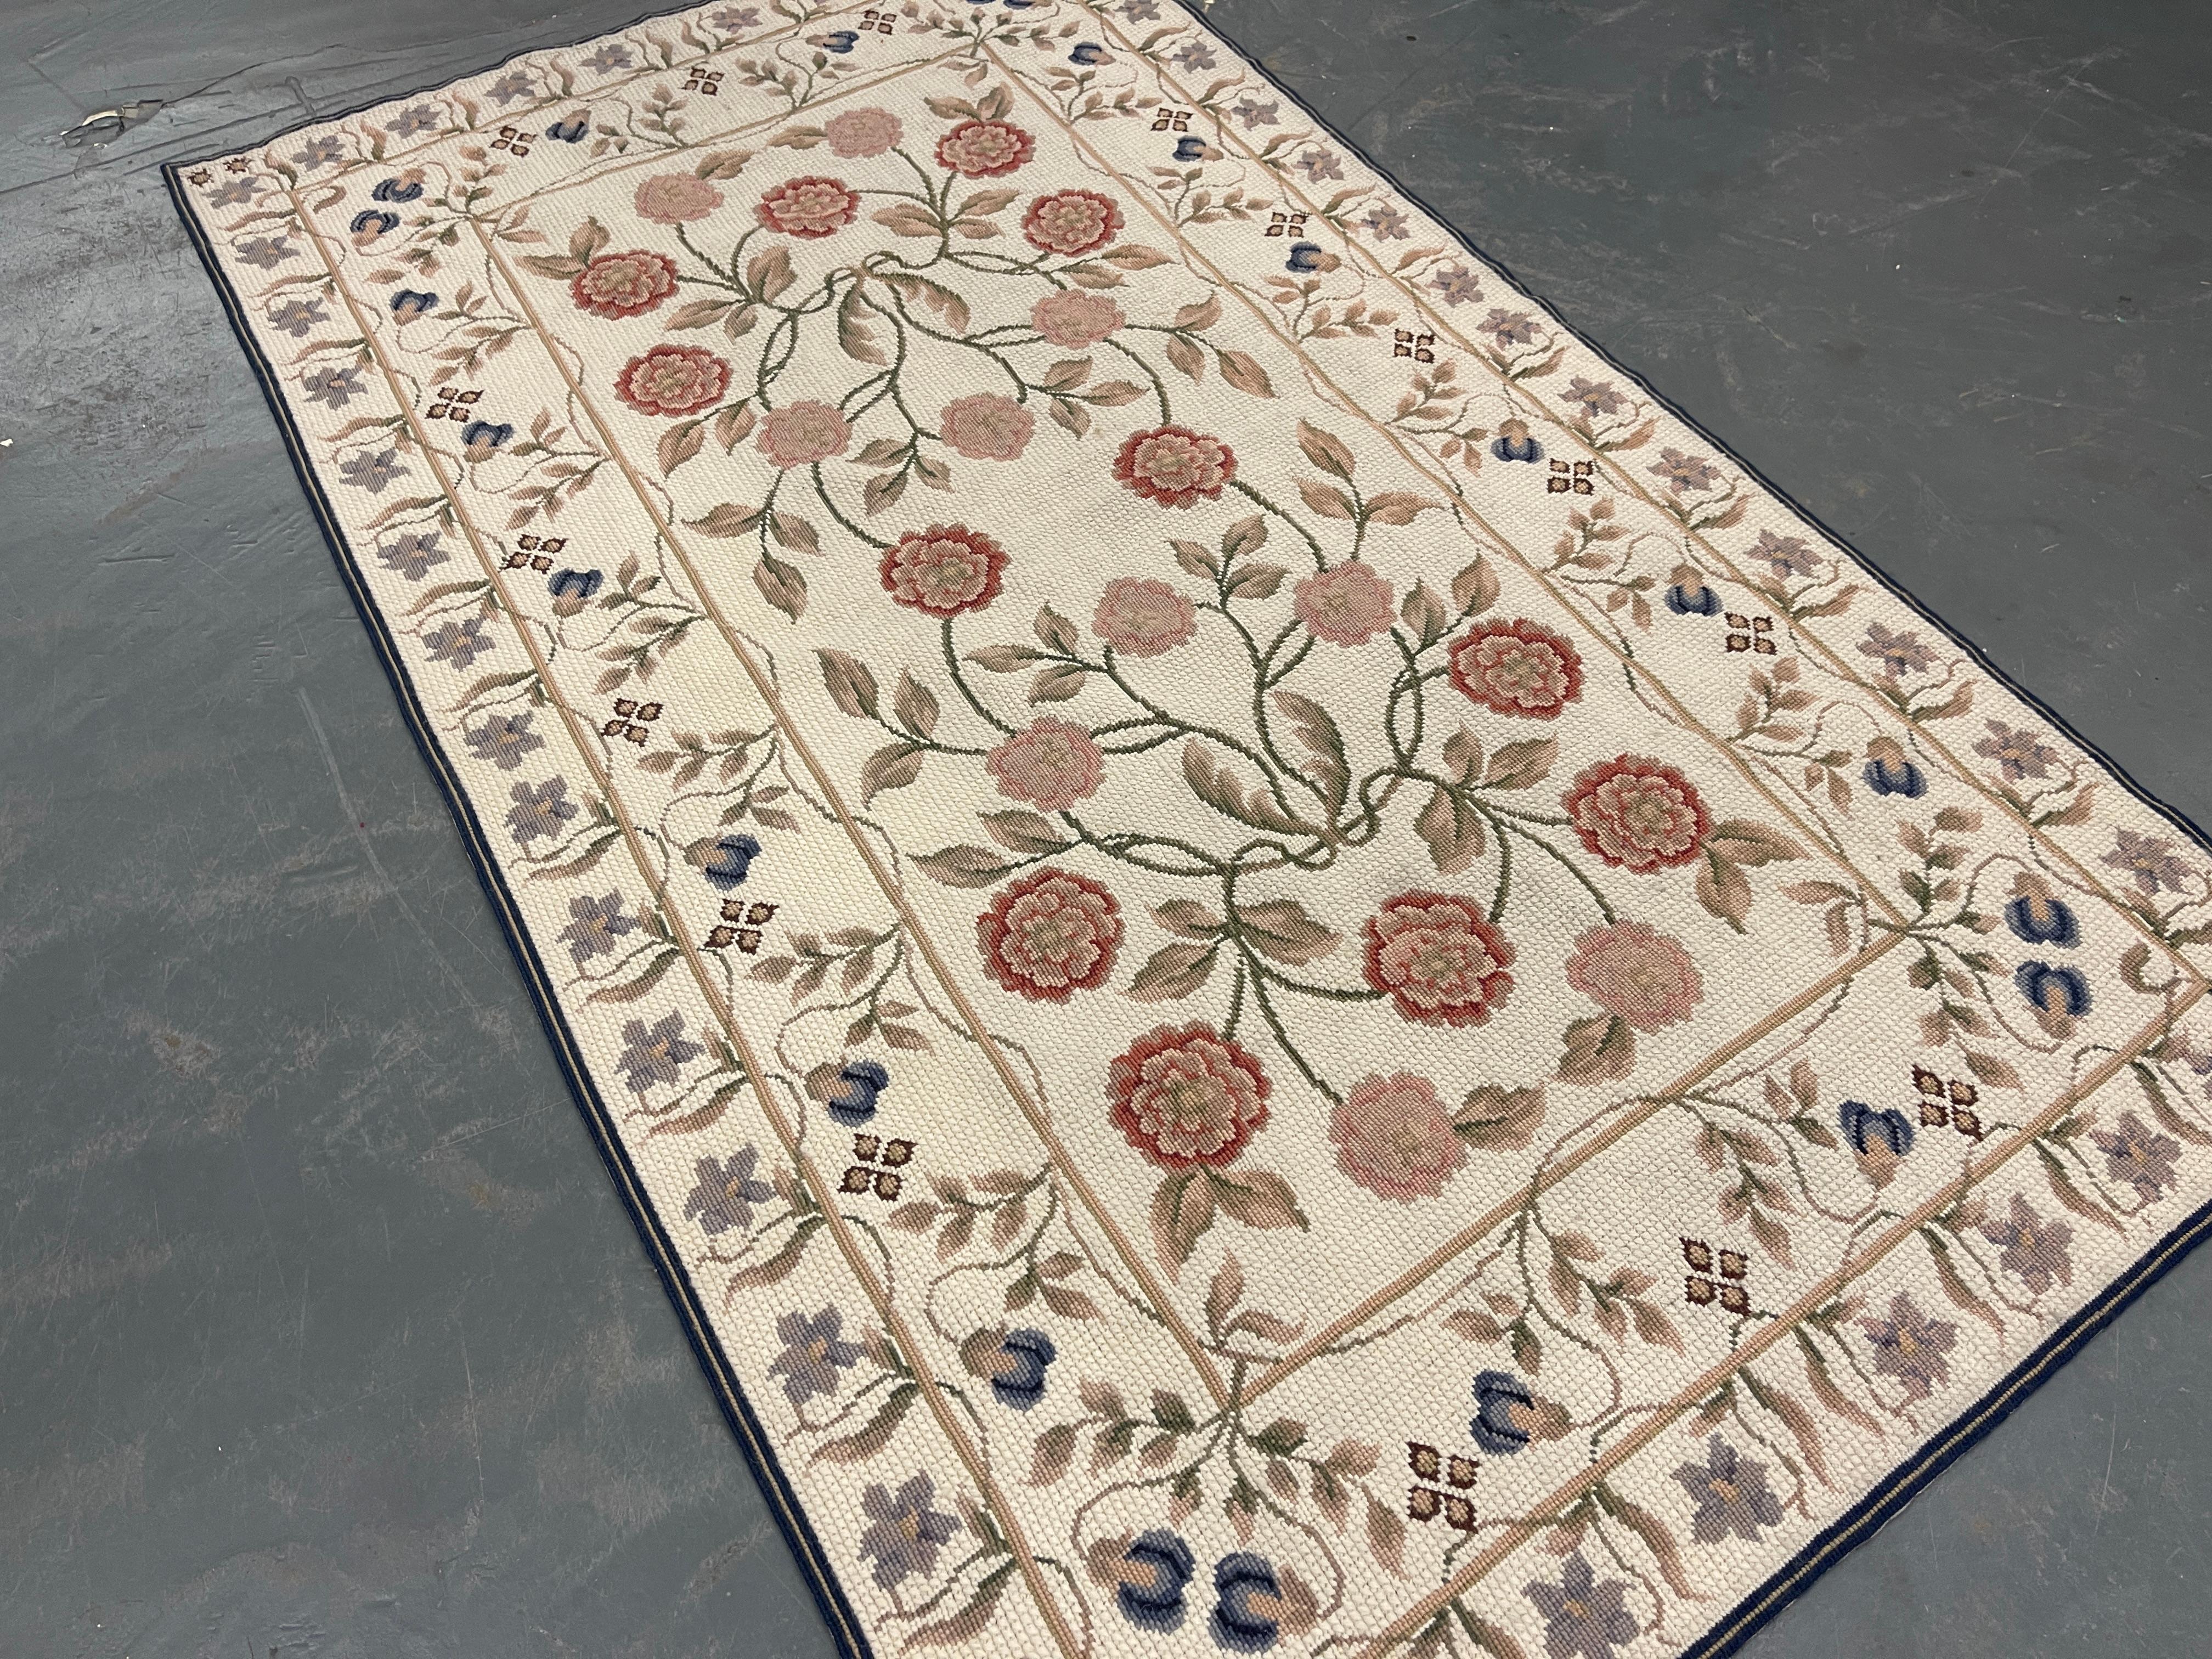 This fantastic area rug has been handwoven with a beautiful, symmetrical floral design woven on an ivory background with cream green and ivory accents. This elegant piece's colour and design make it the perfect accent rug.
This style of rugs is best